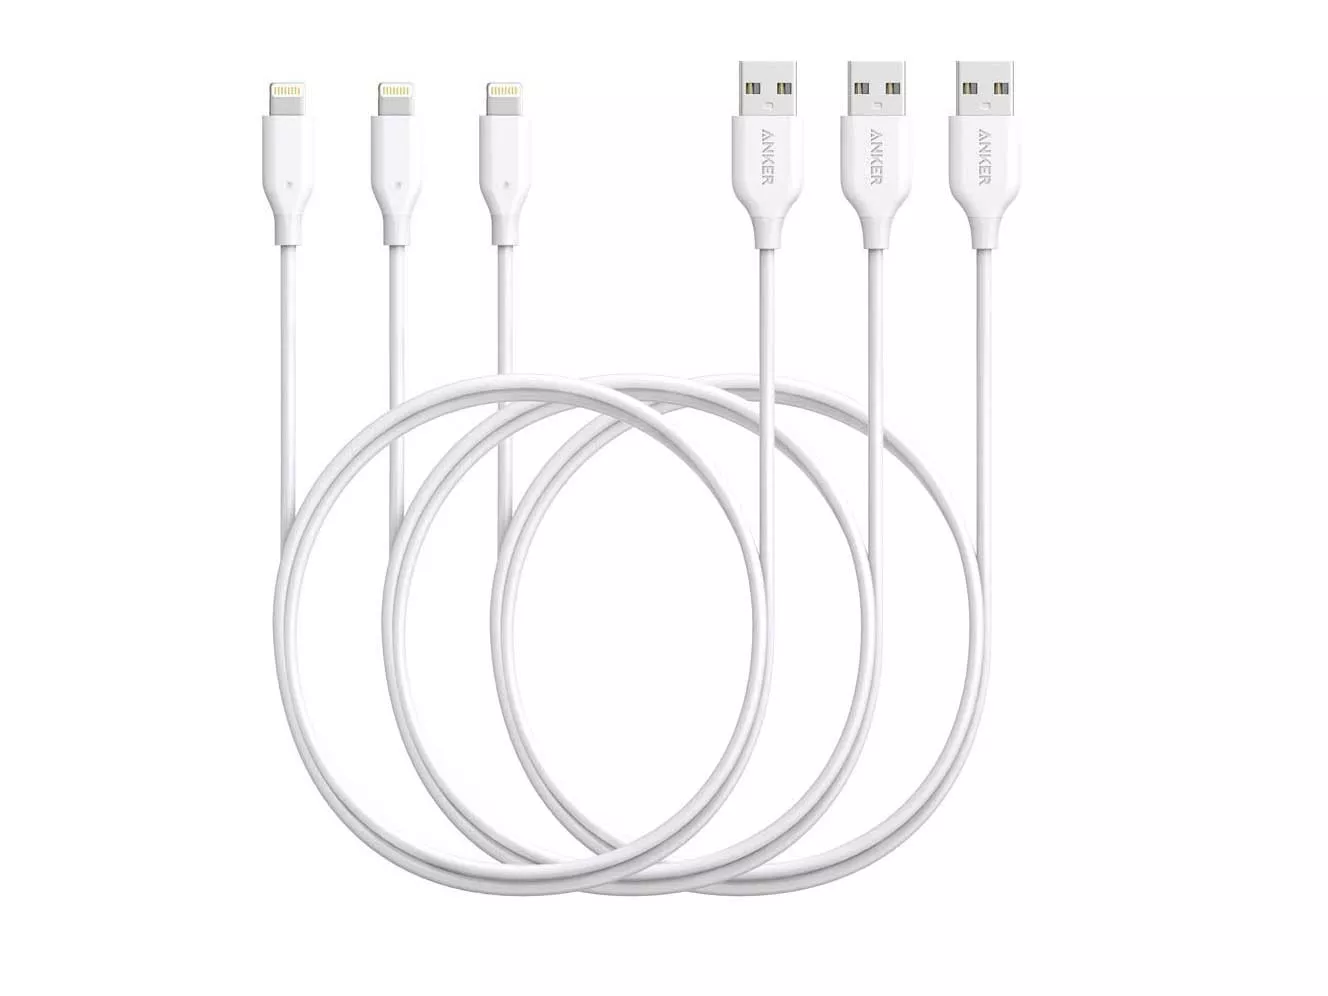 Anker Powerline Lightning 3-Foot Cable 3-Pack